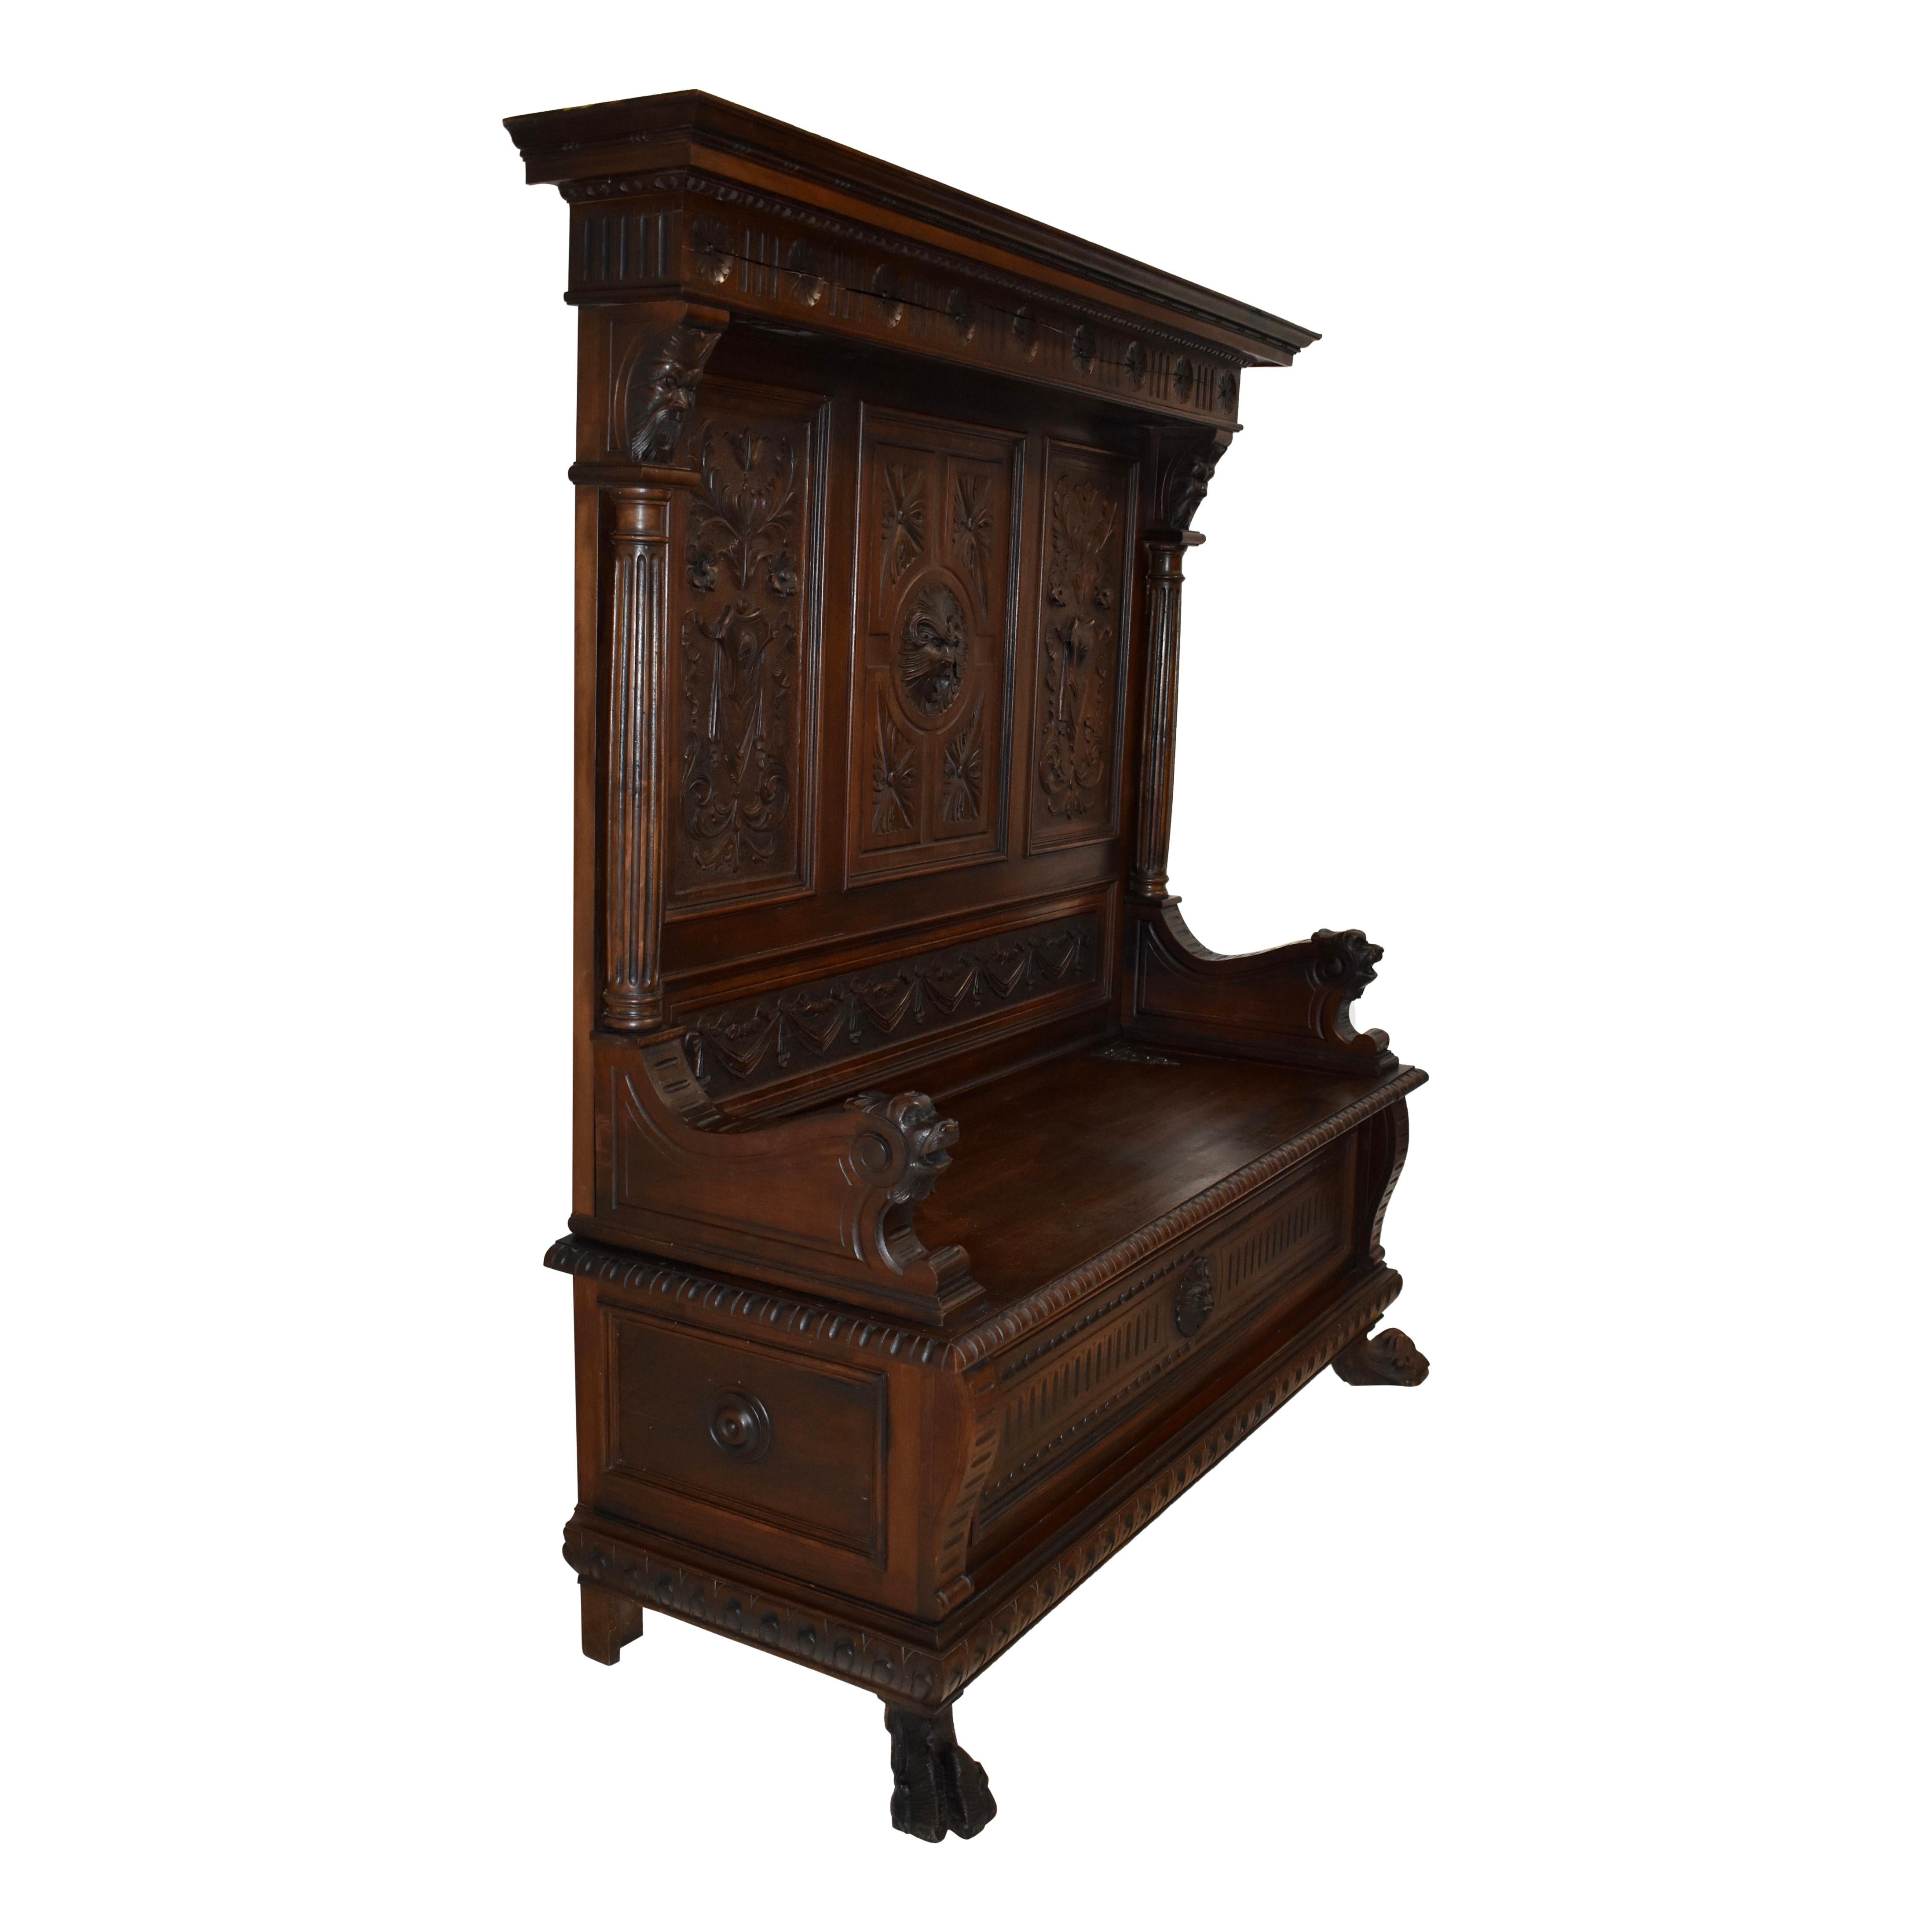 With elaborate carvings of the Renaissance Revival style, this walnut bench features a molded cornice over a frieze with floral roundels, a high back, scrolled arms, upright fluted columns, a bench seat on iron strap hinges that opens to divided